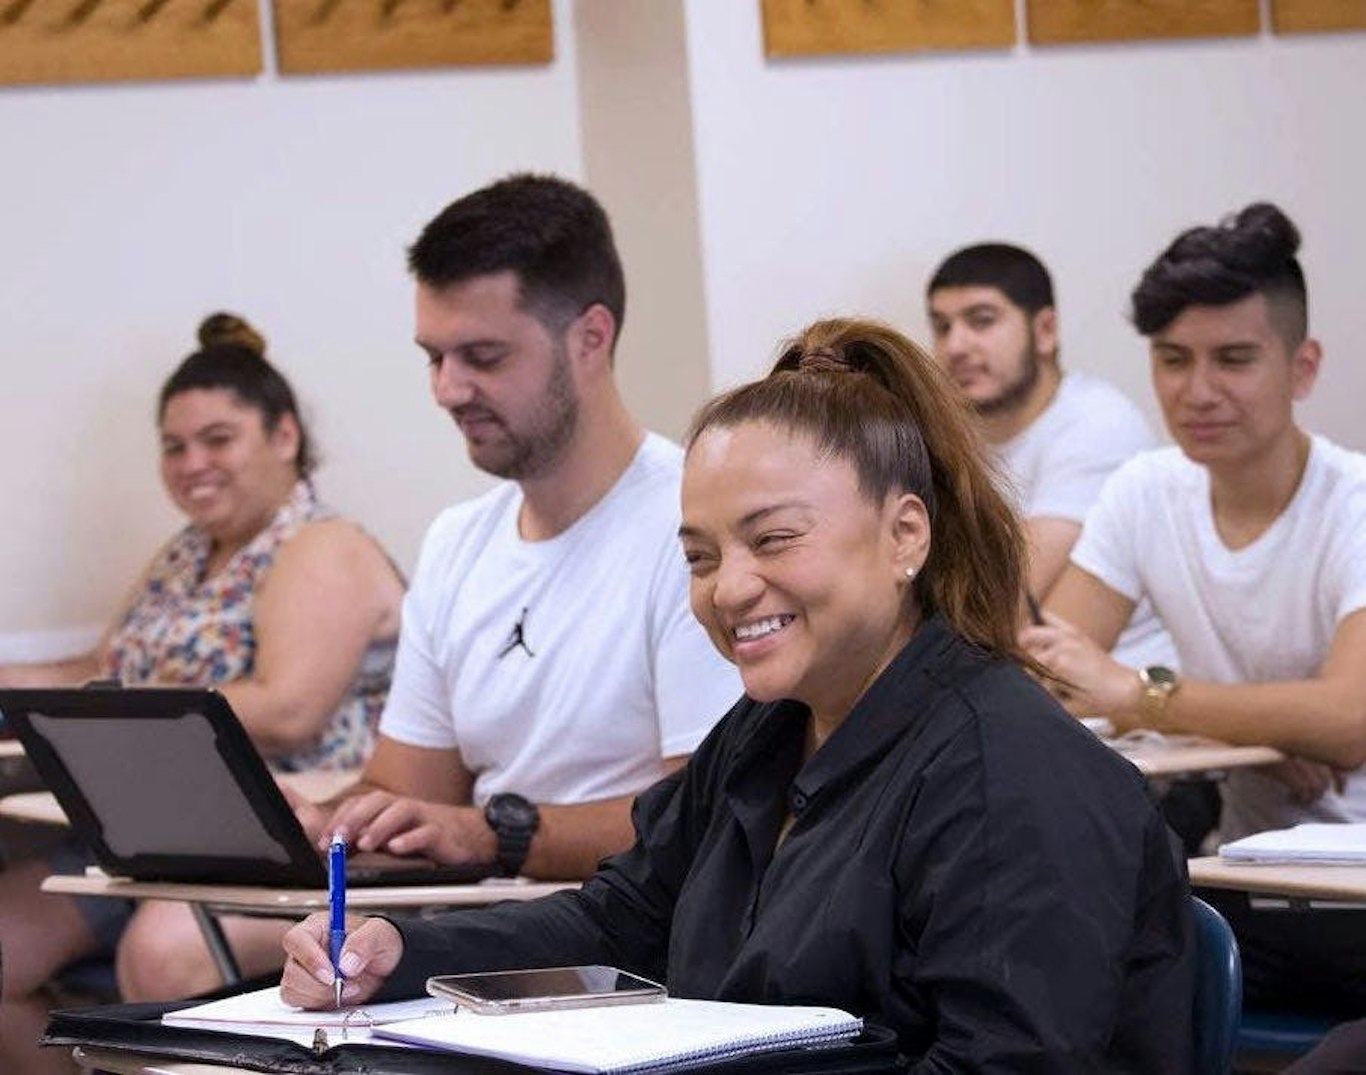 Kingsborough Community College students in class